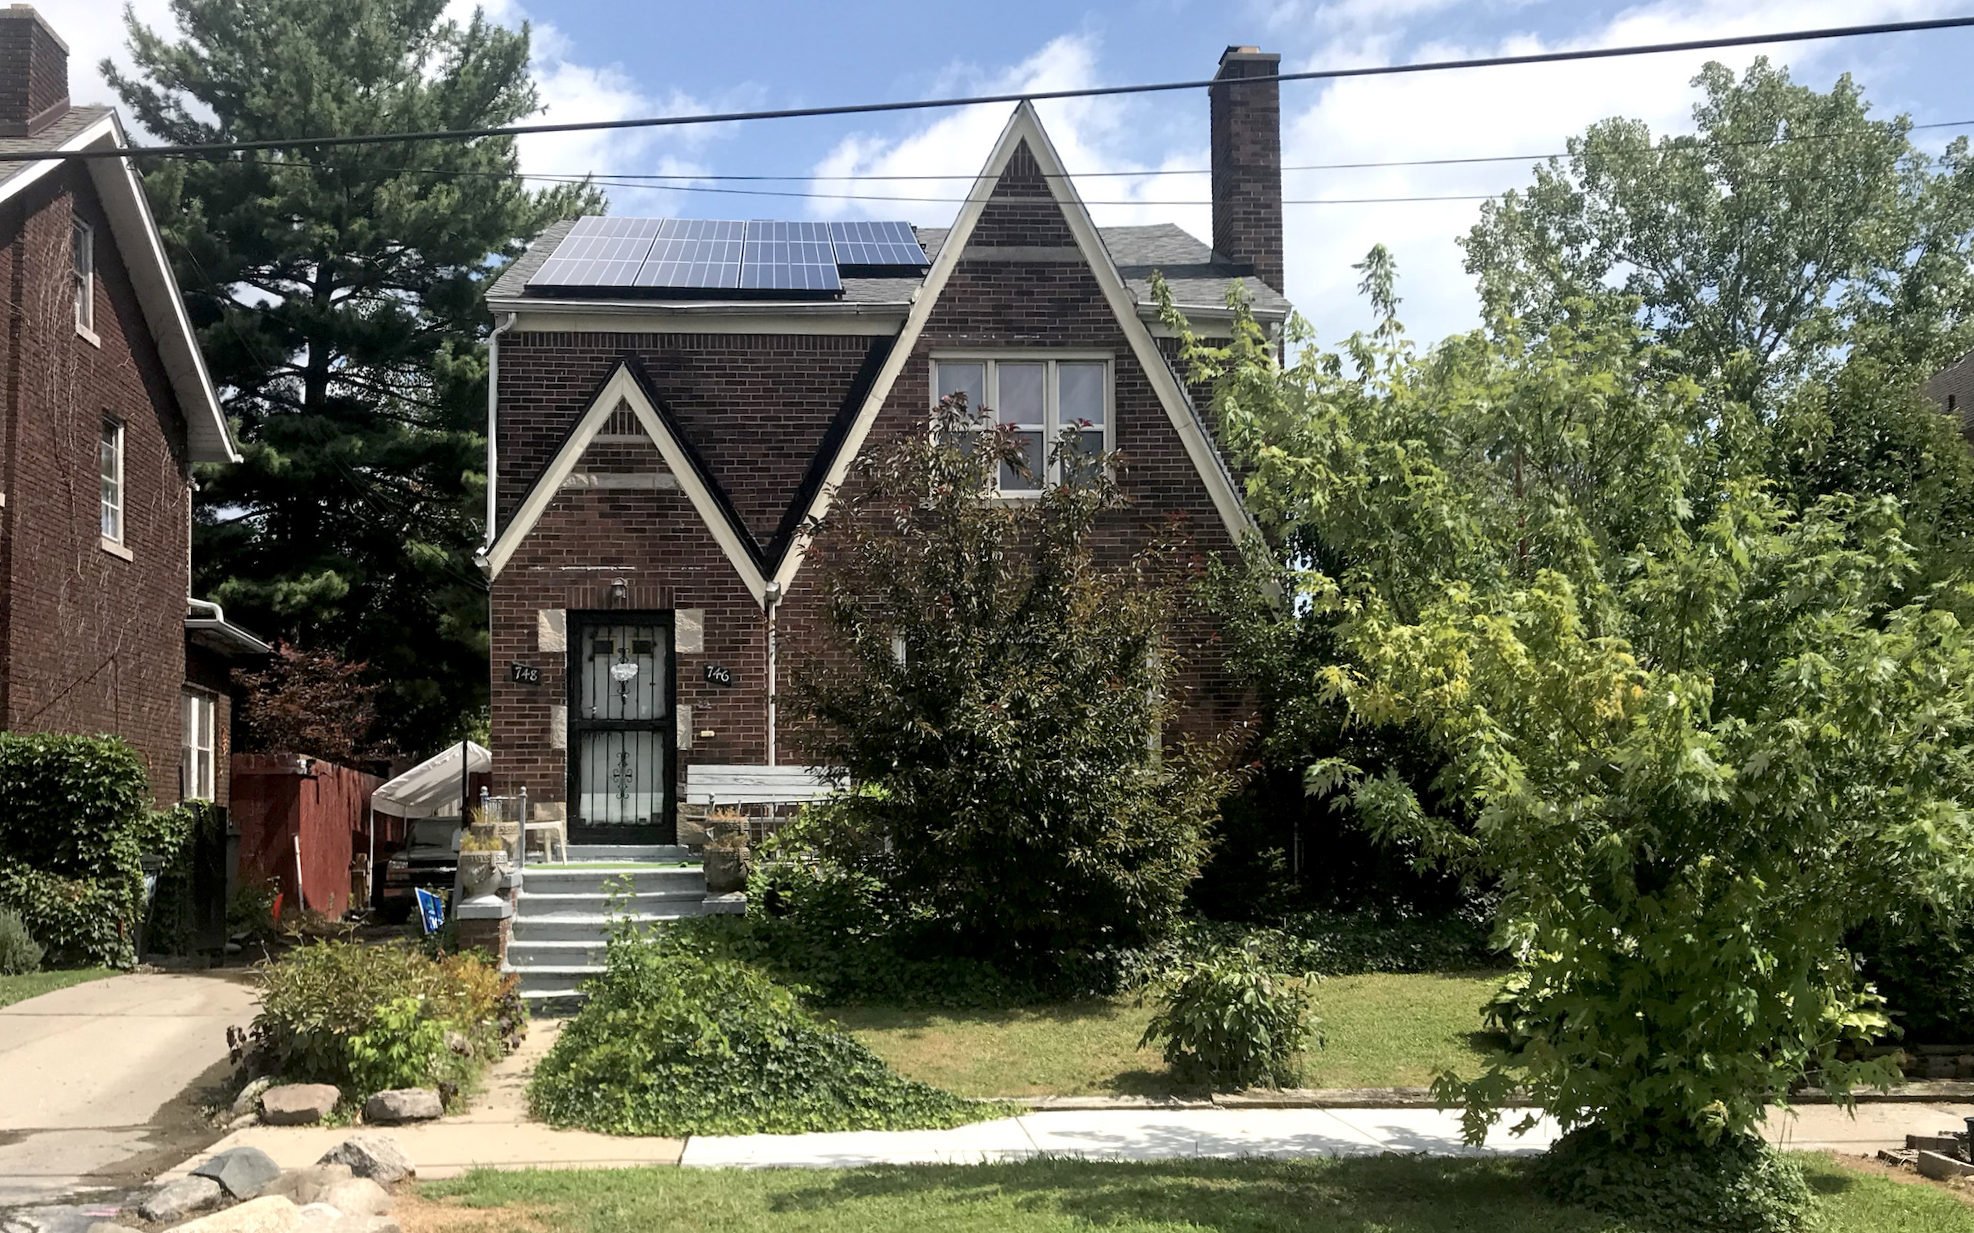 Home on Ashland street in Detroit's Jefferson Chalmers neighborhood recently installed solar panels as its basement flooded with water from the Detroit River